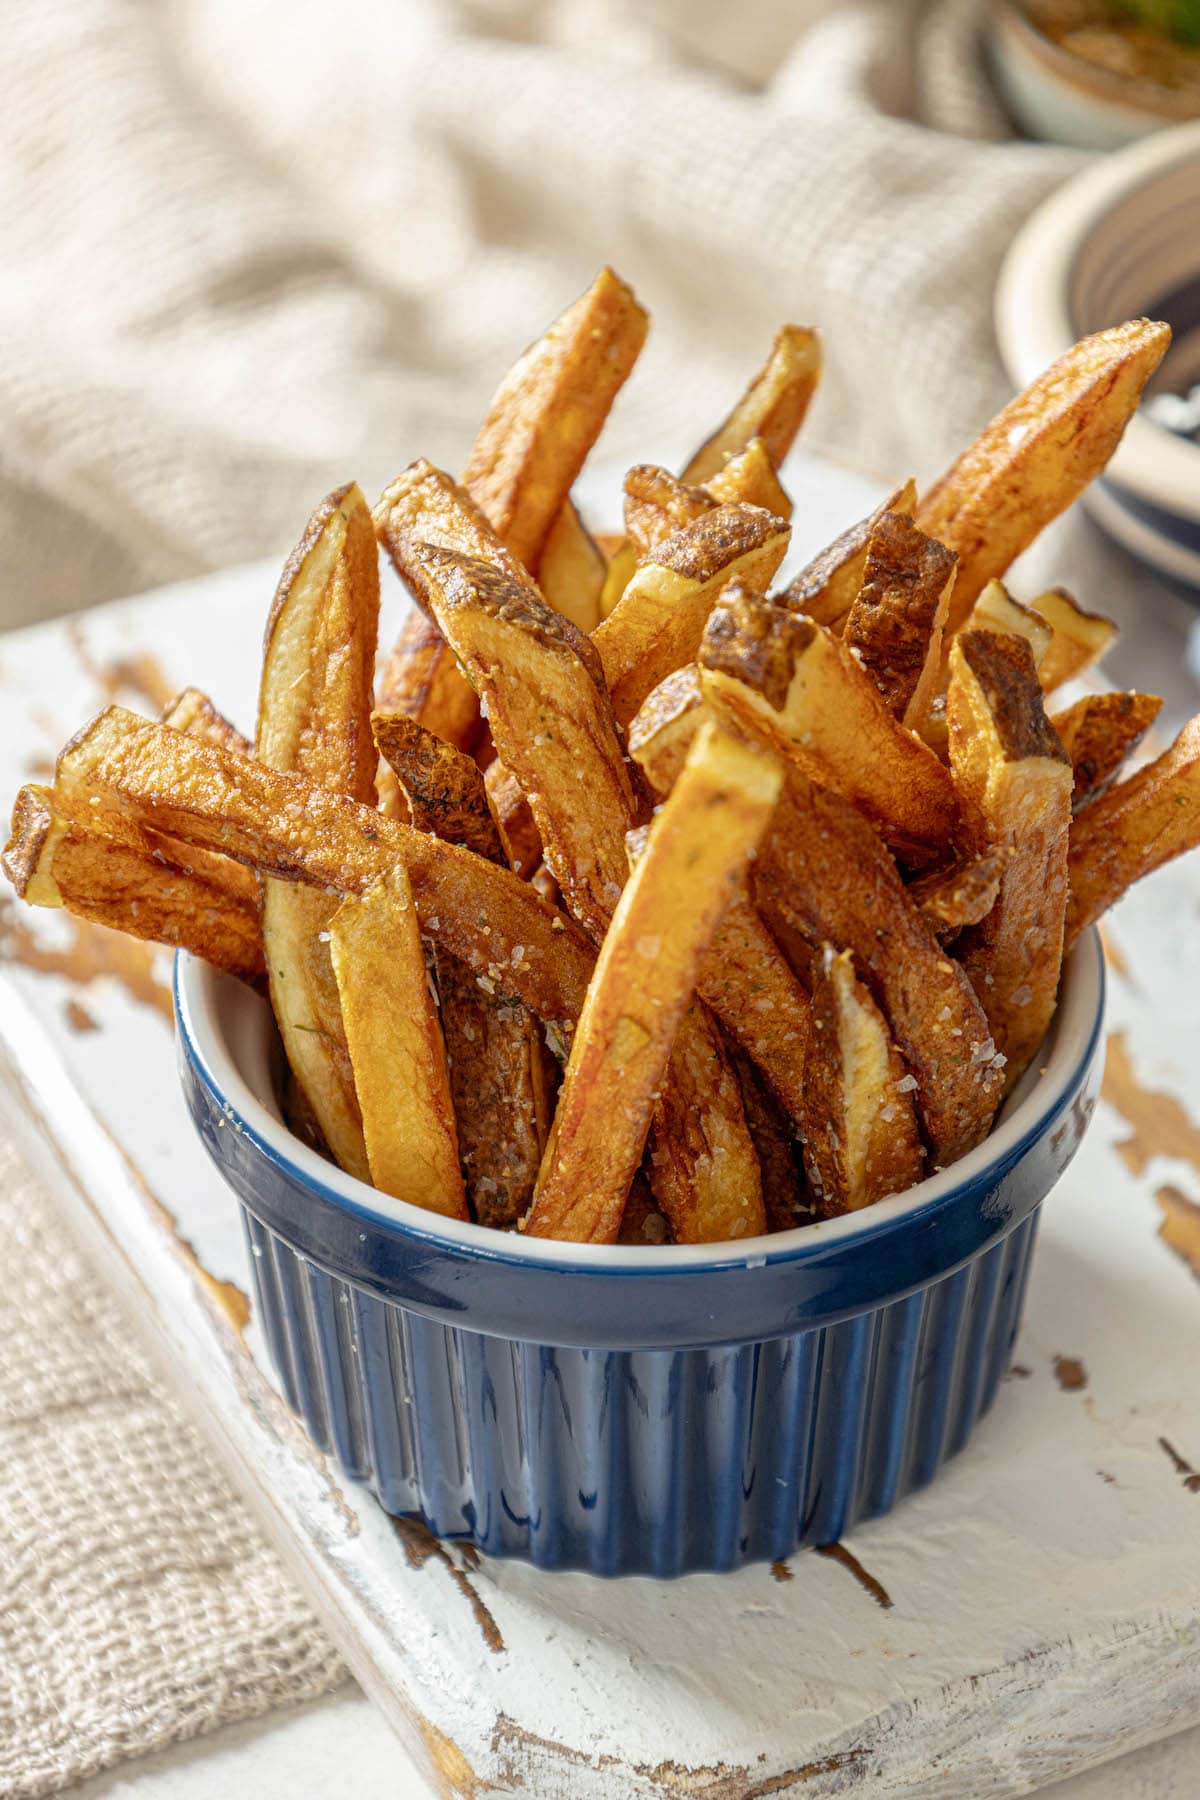 French fries in a blue bowl on a table.